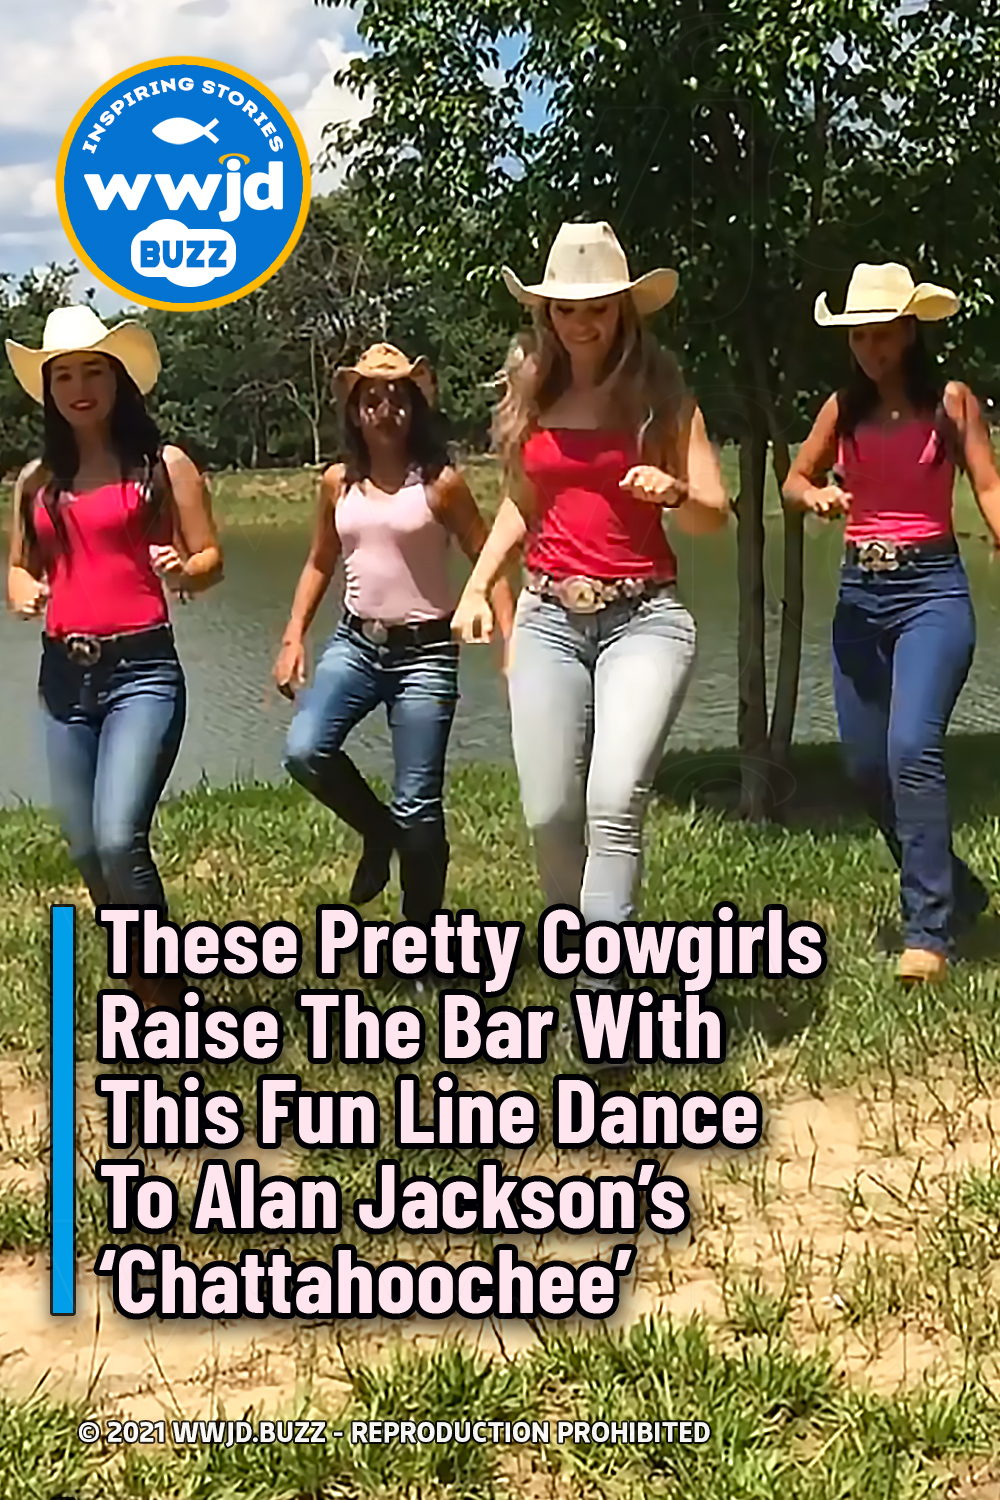 These Pretty Cowgirls Raise The Bar With This Fun Line Dance To Alan Jackson’s ‘Chattahoochee’